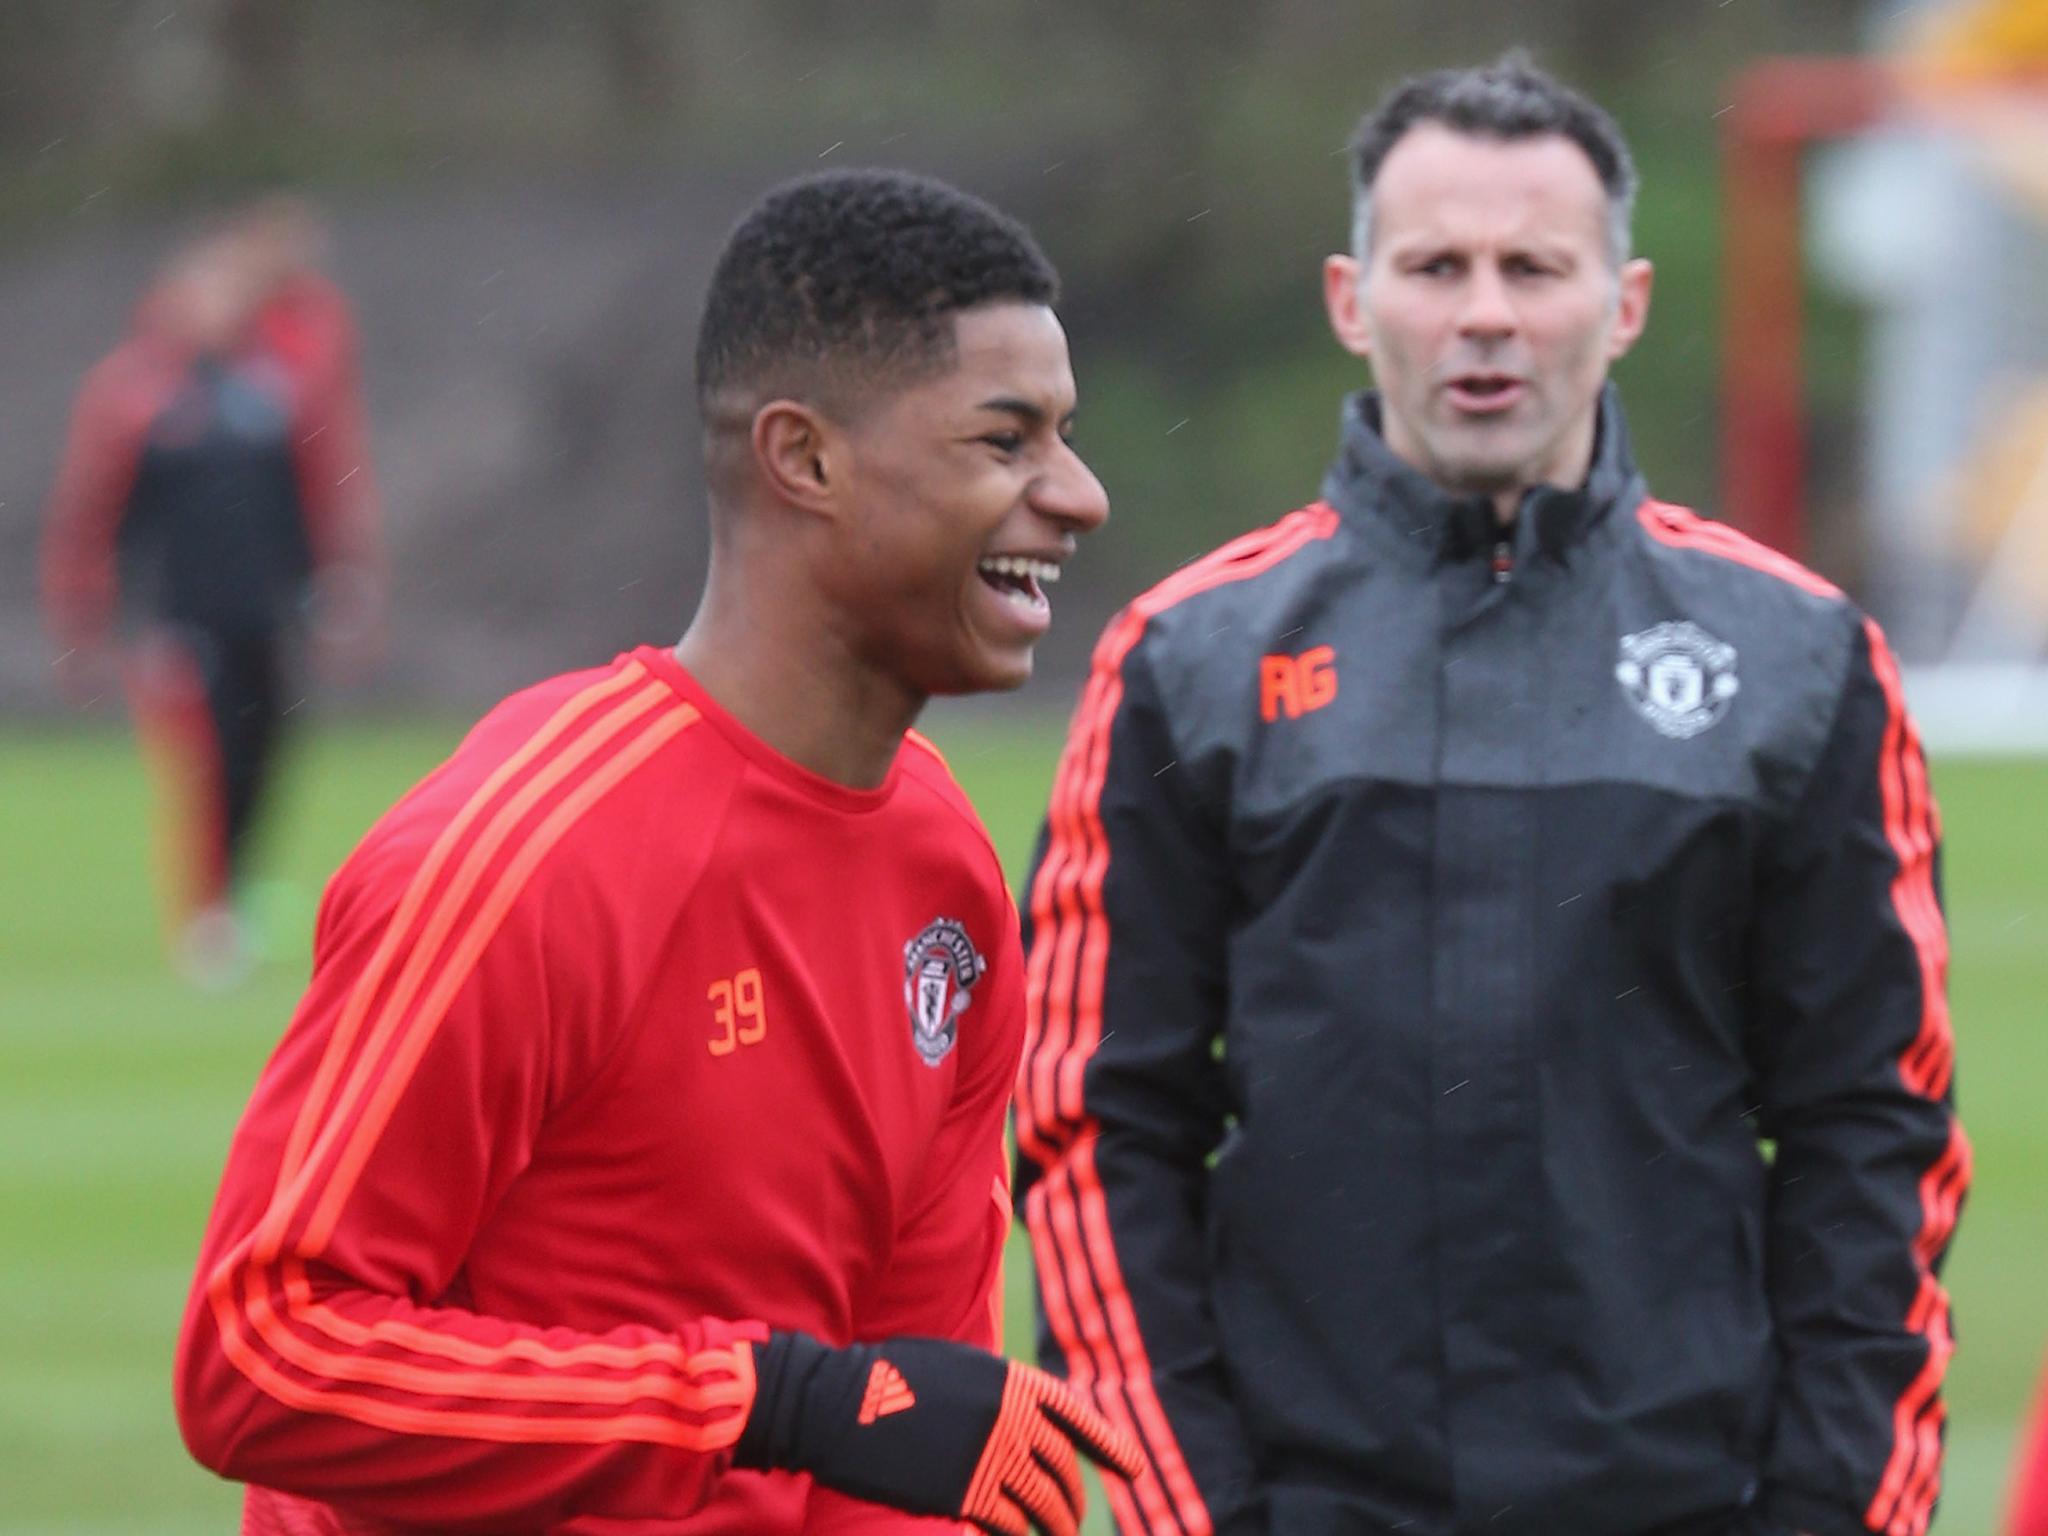 Ryan Giggs to give youth a chance with Wales after bringing Marcus Rashford through at Manchester United